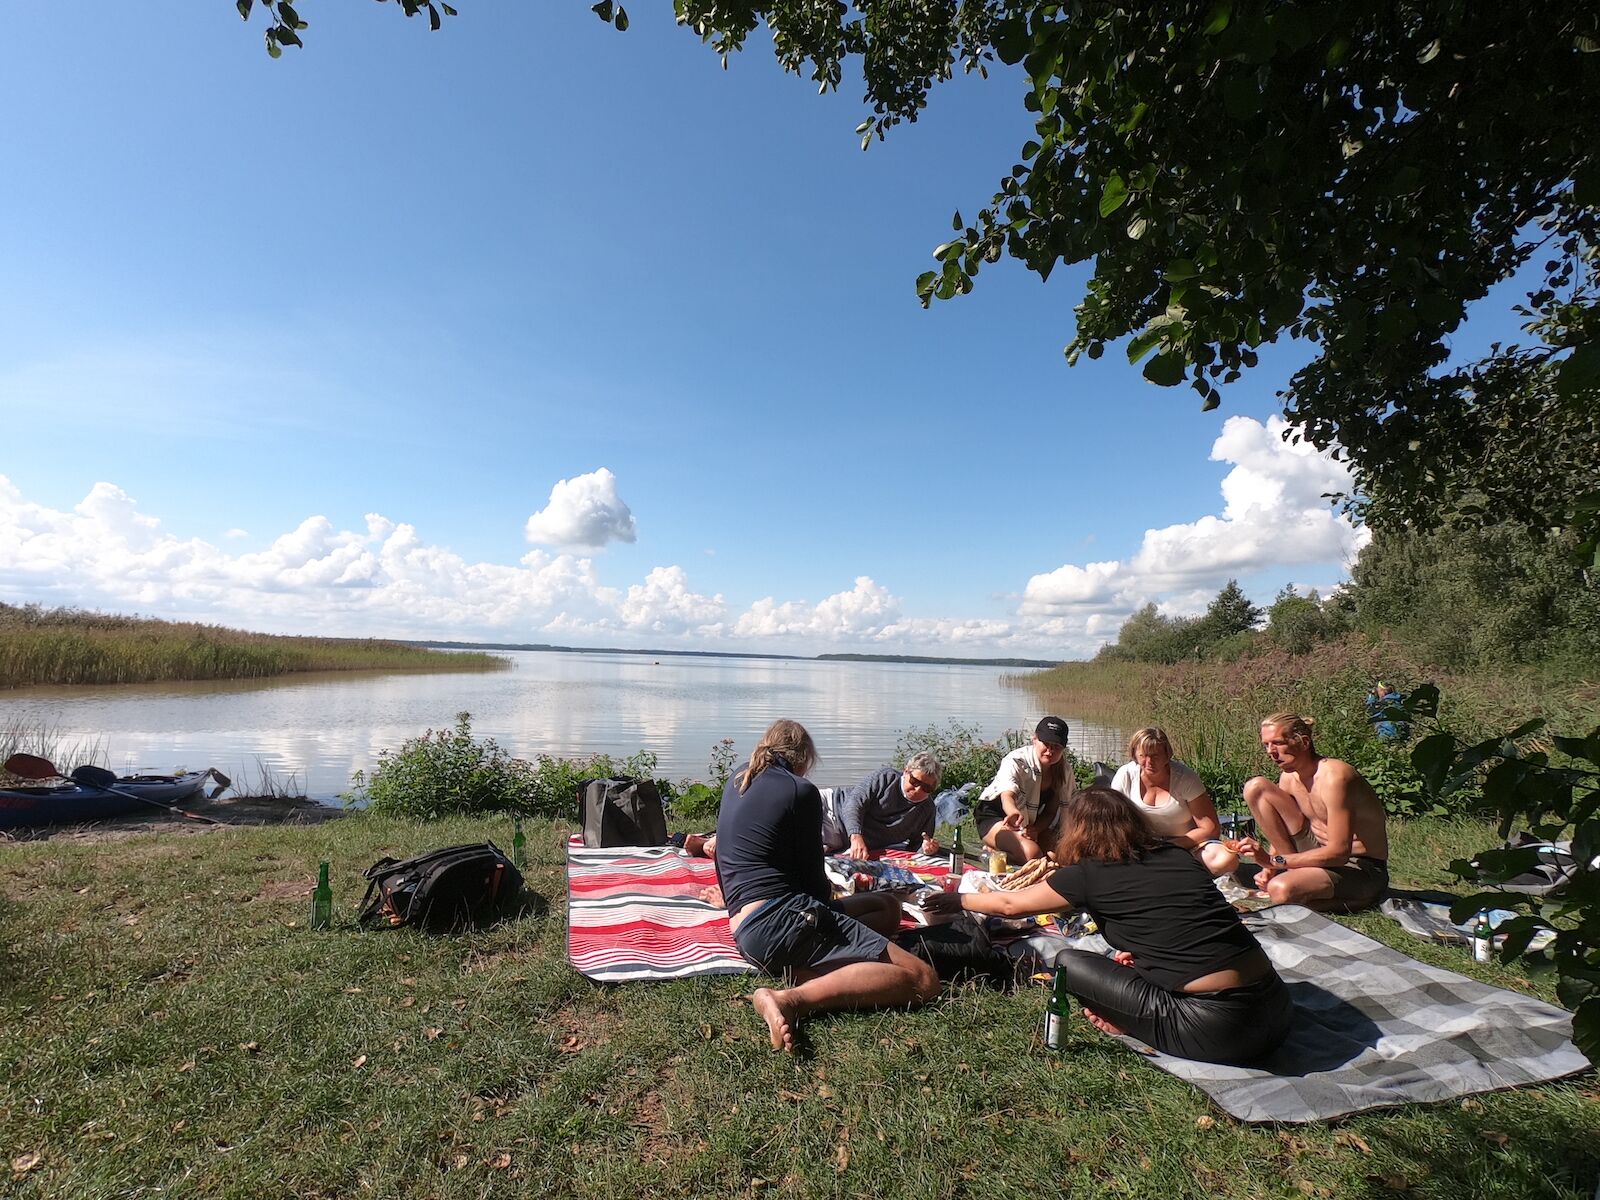 picnic on lake muritz in germany